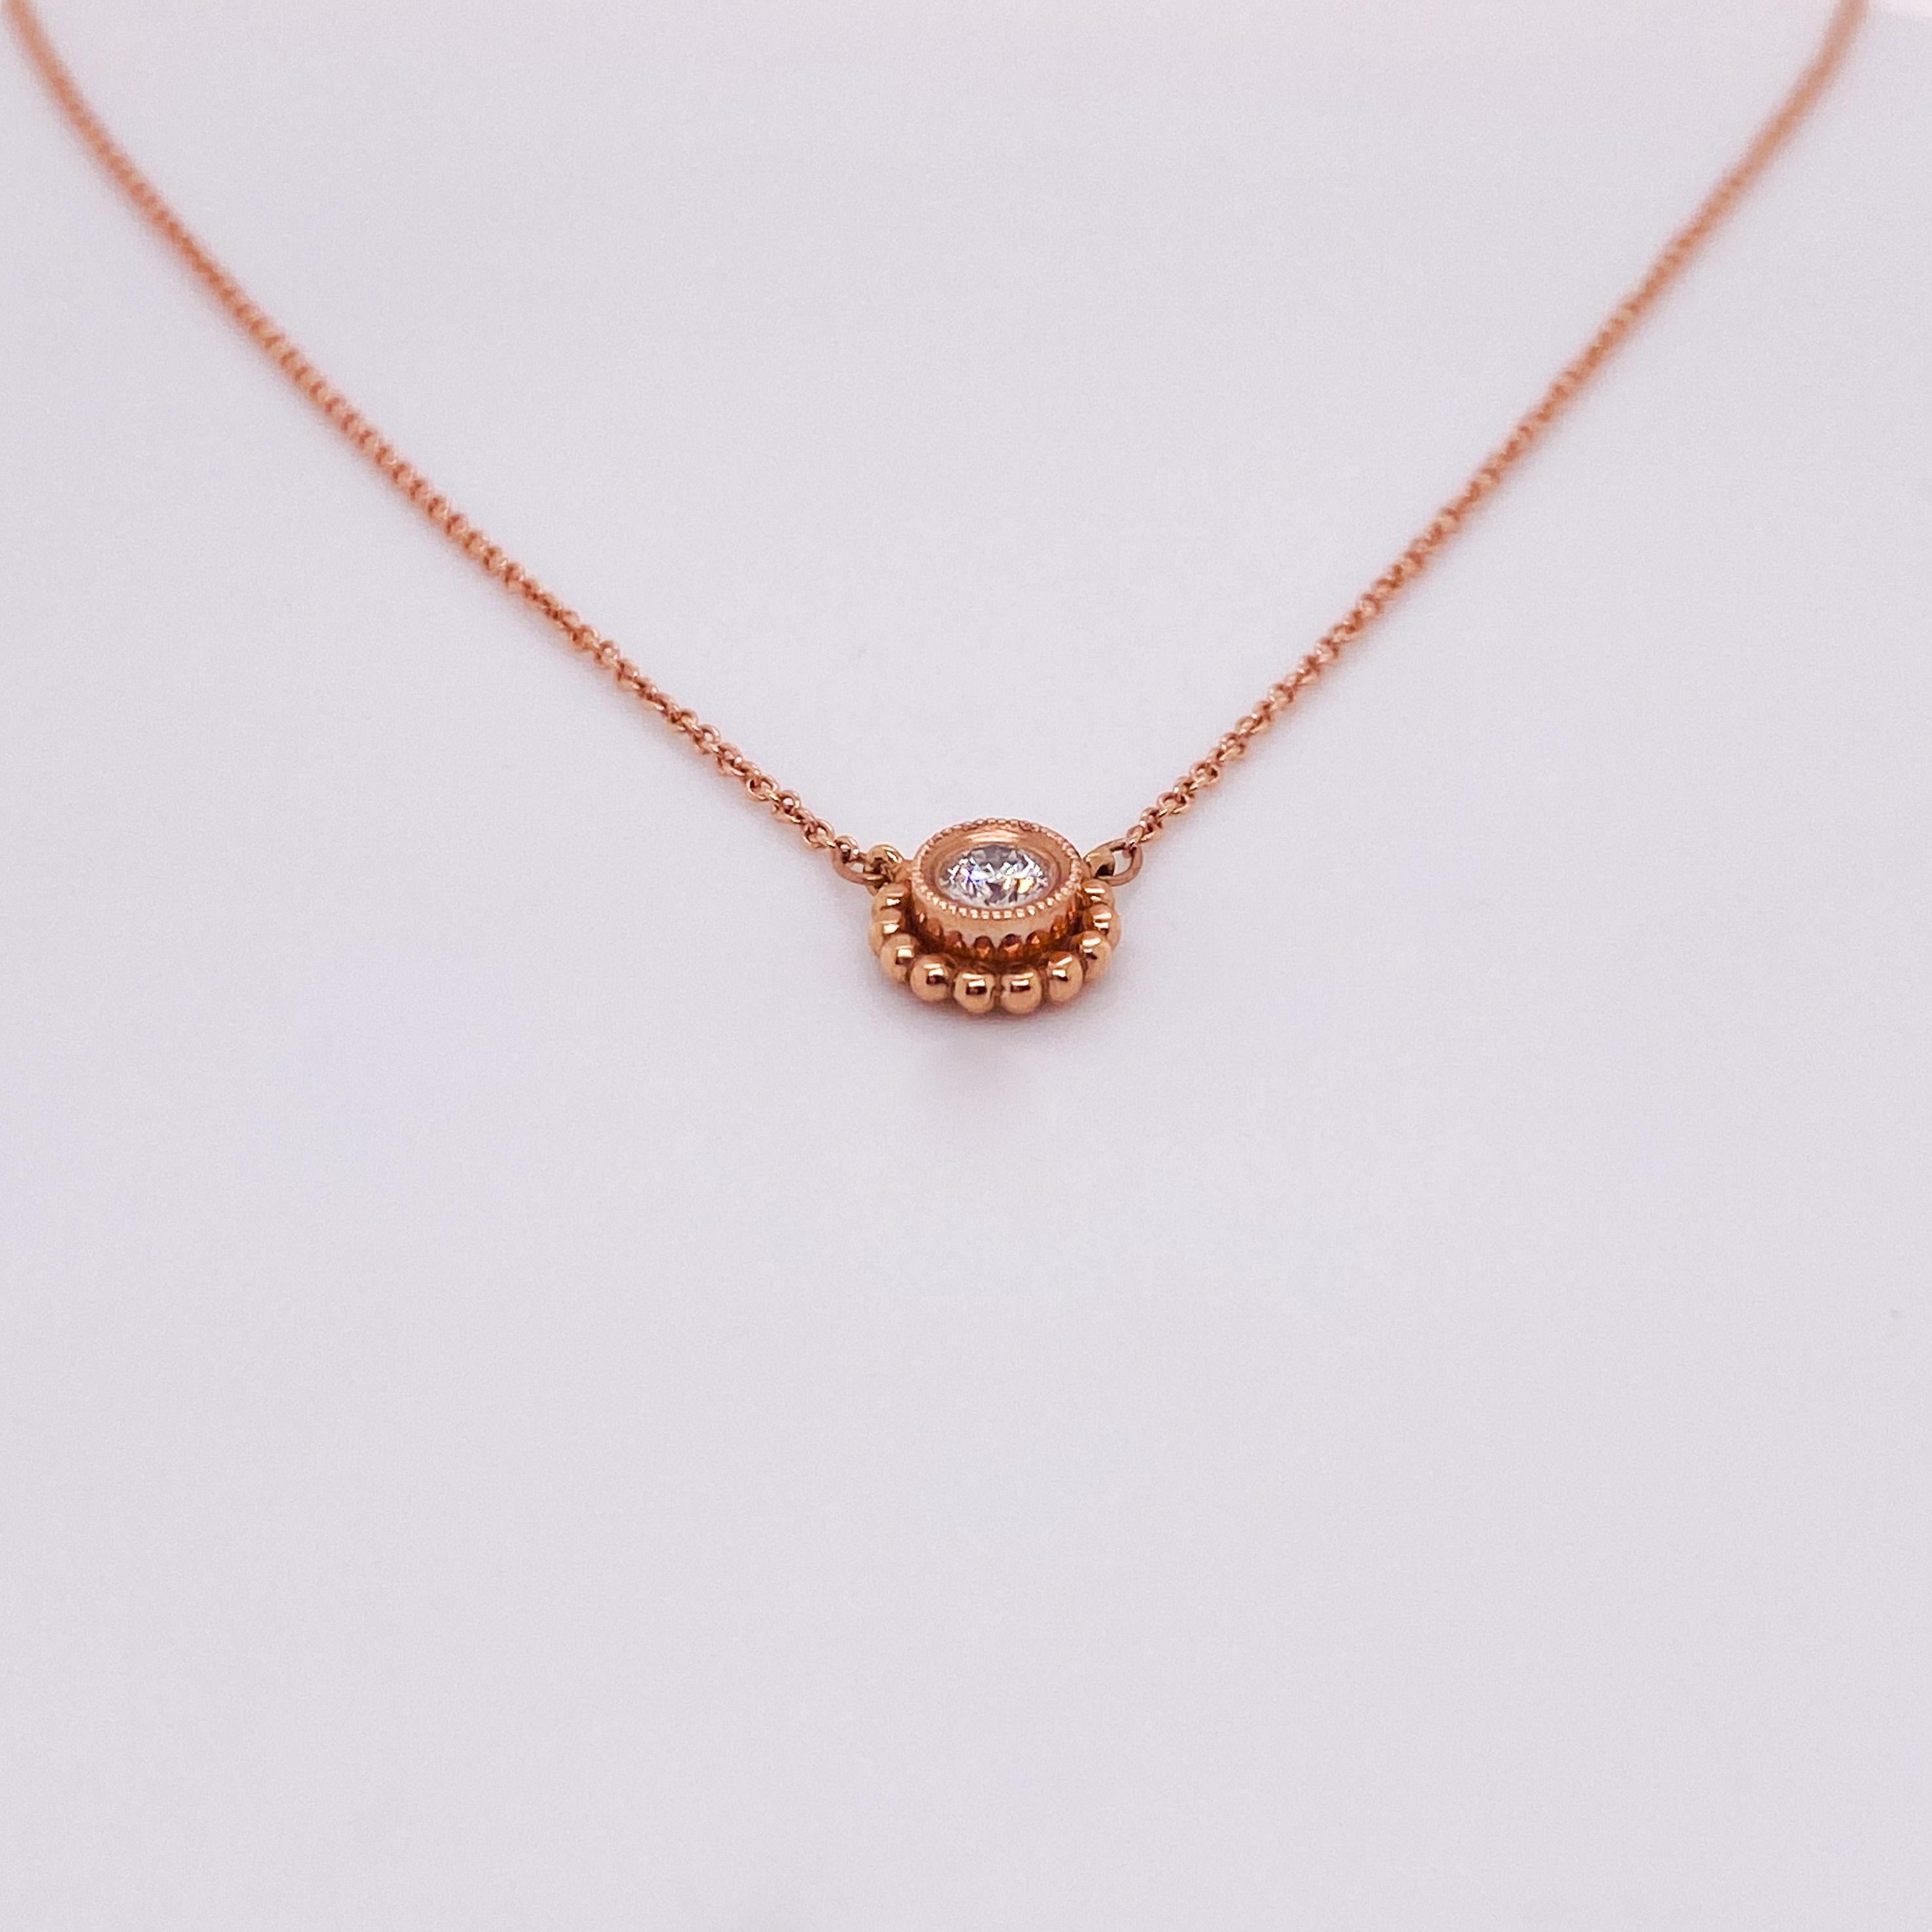 Dainty Diamond Daisy Necklace .12 Carats in 14K Rose Gold, April Birthstone LV In New Condition For Sale In Austin, TX